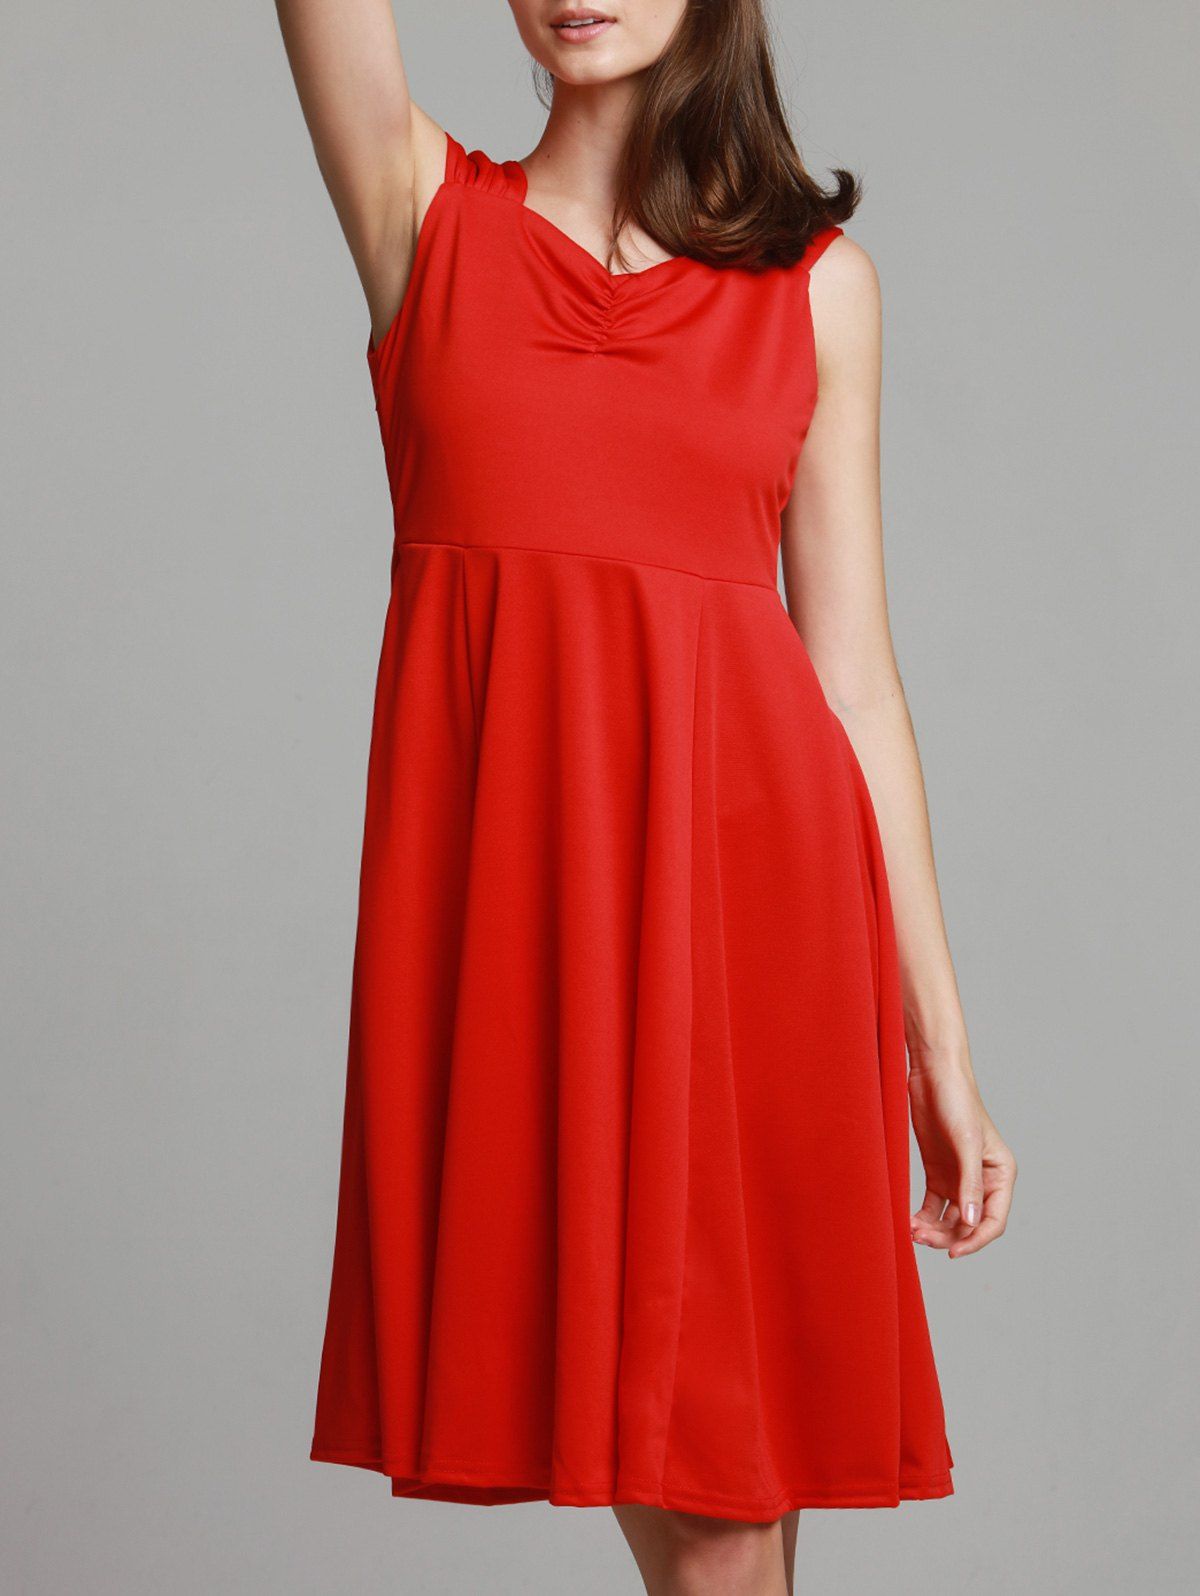 Red Retro Style Sweetheart Neck Solid Color Sleeveless ...
